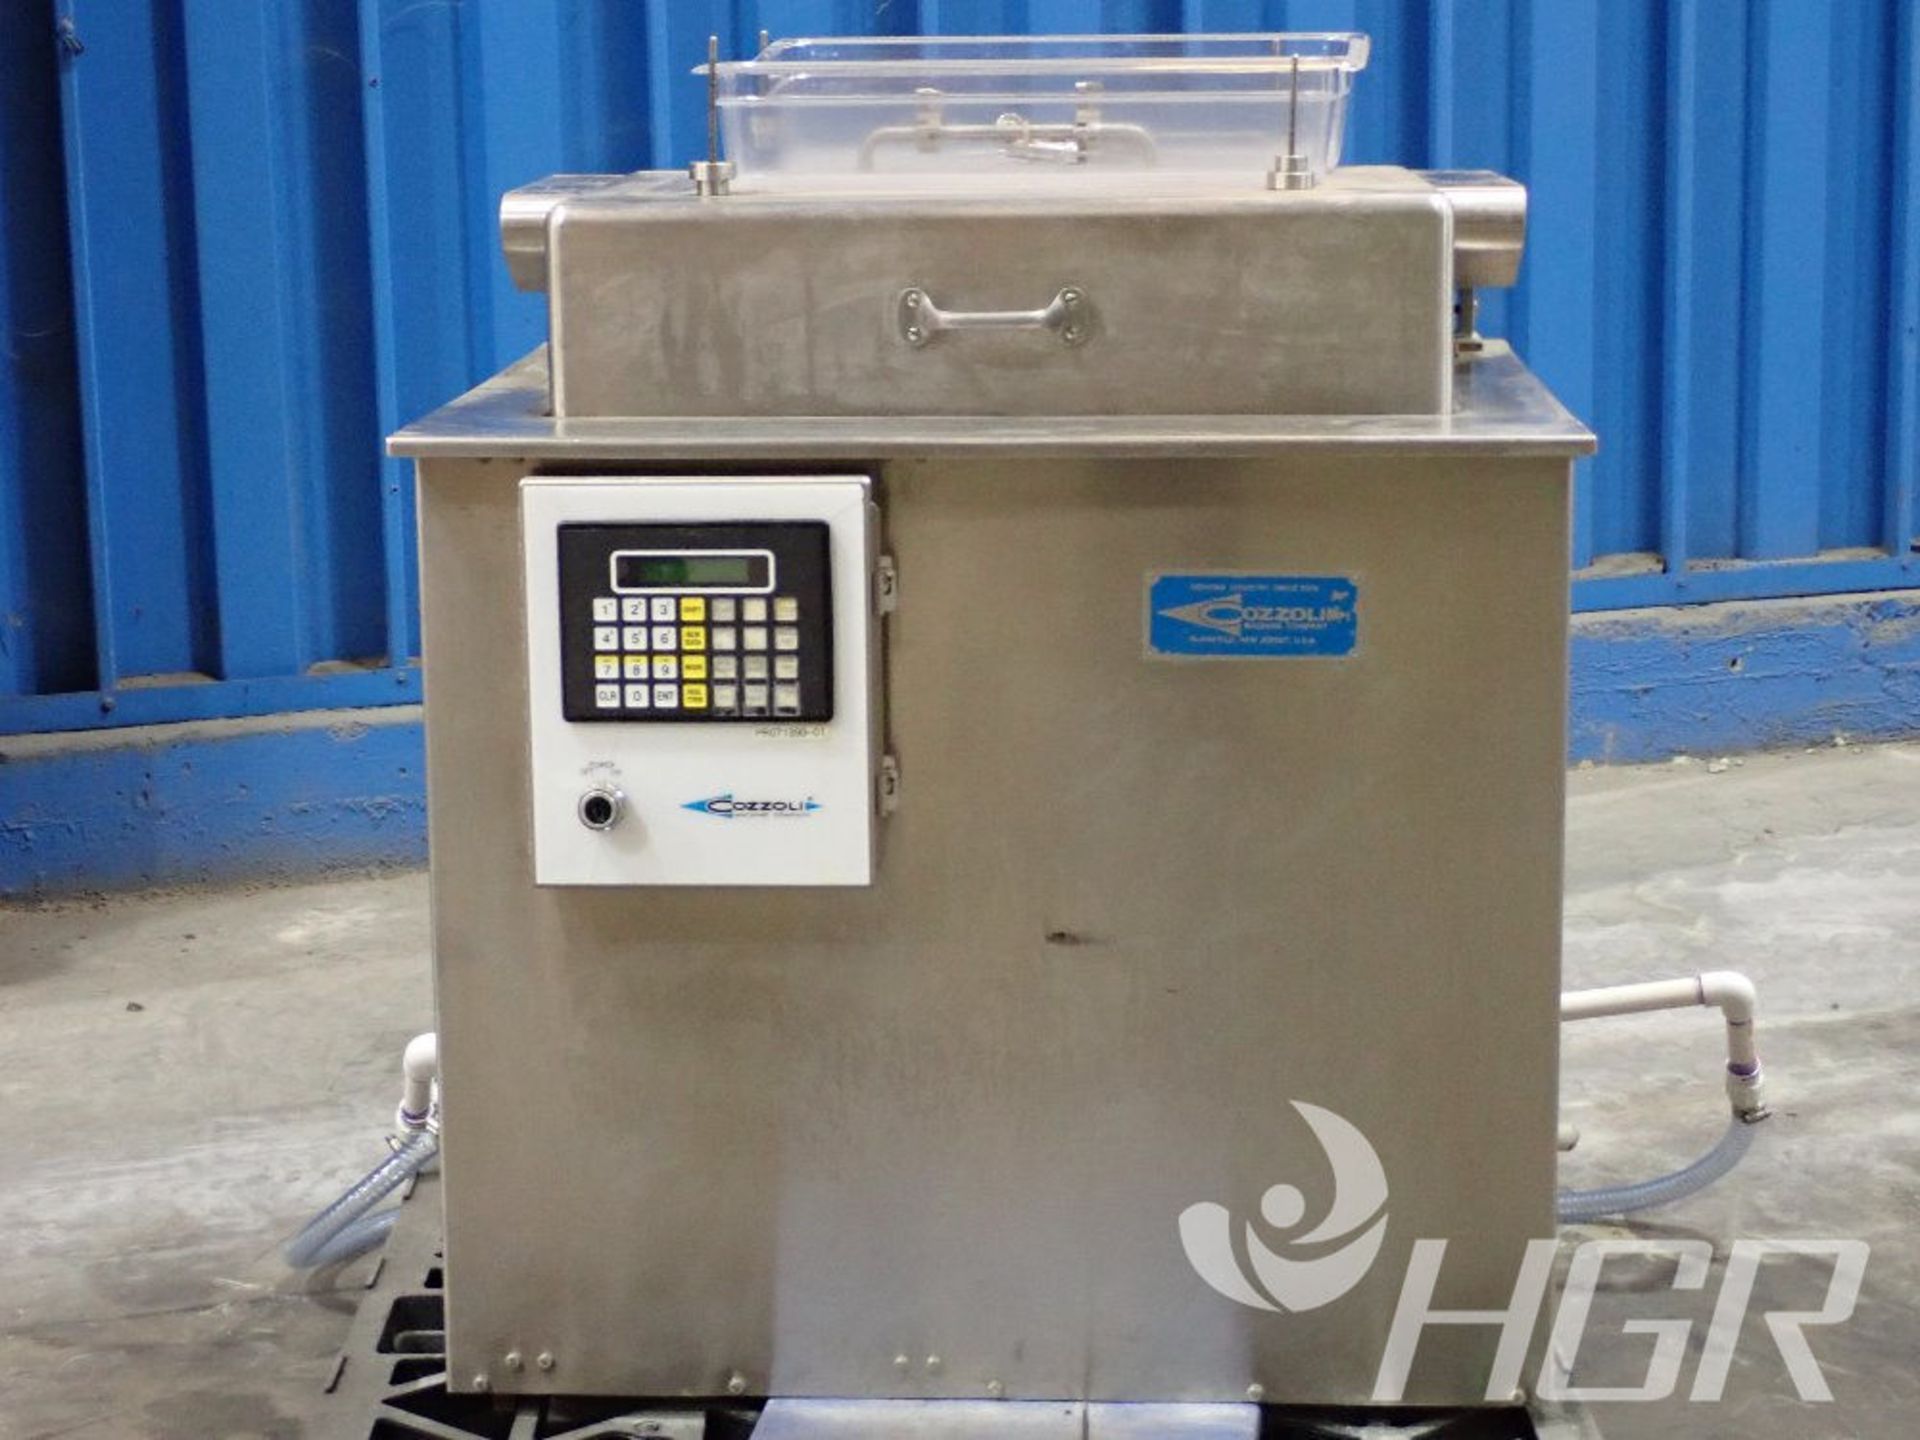 COZZOLI CLEANING STATION, Model n/a, Date: n/a; s/n GW24-242, Approx. Capacity: 21X15, Power: n/a, - Image 2 of 16